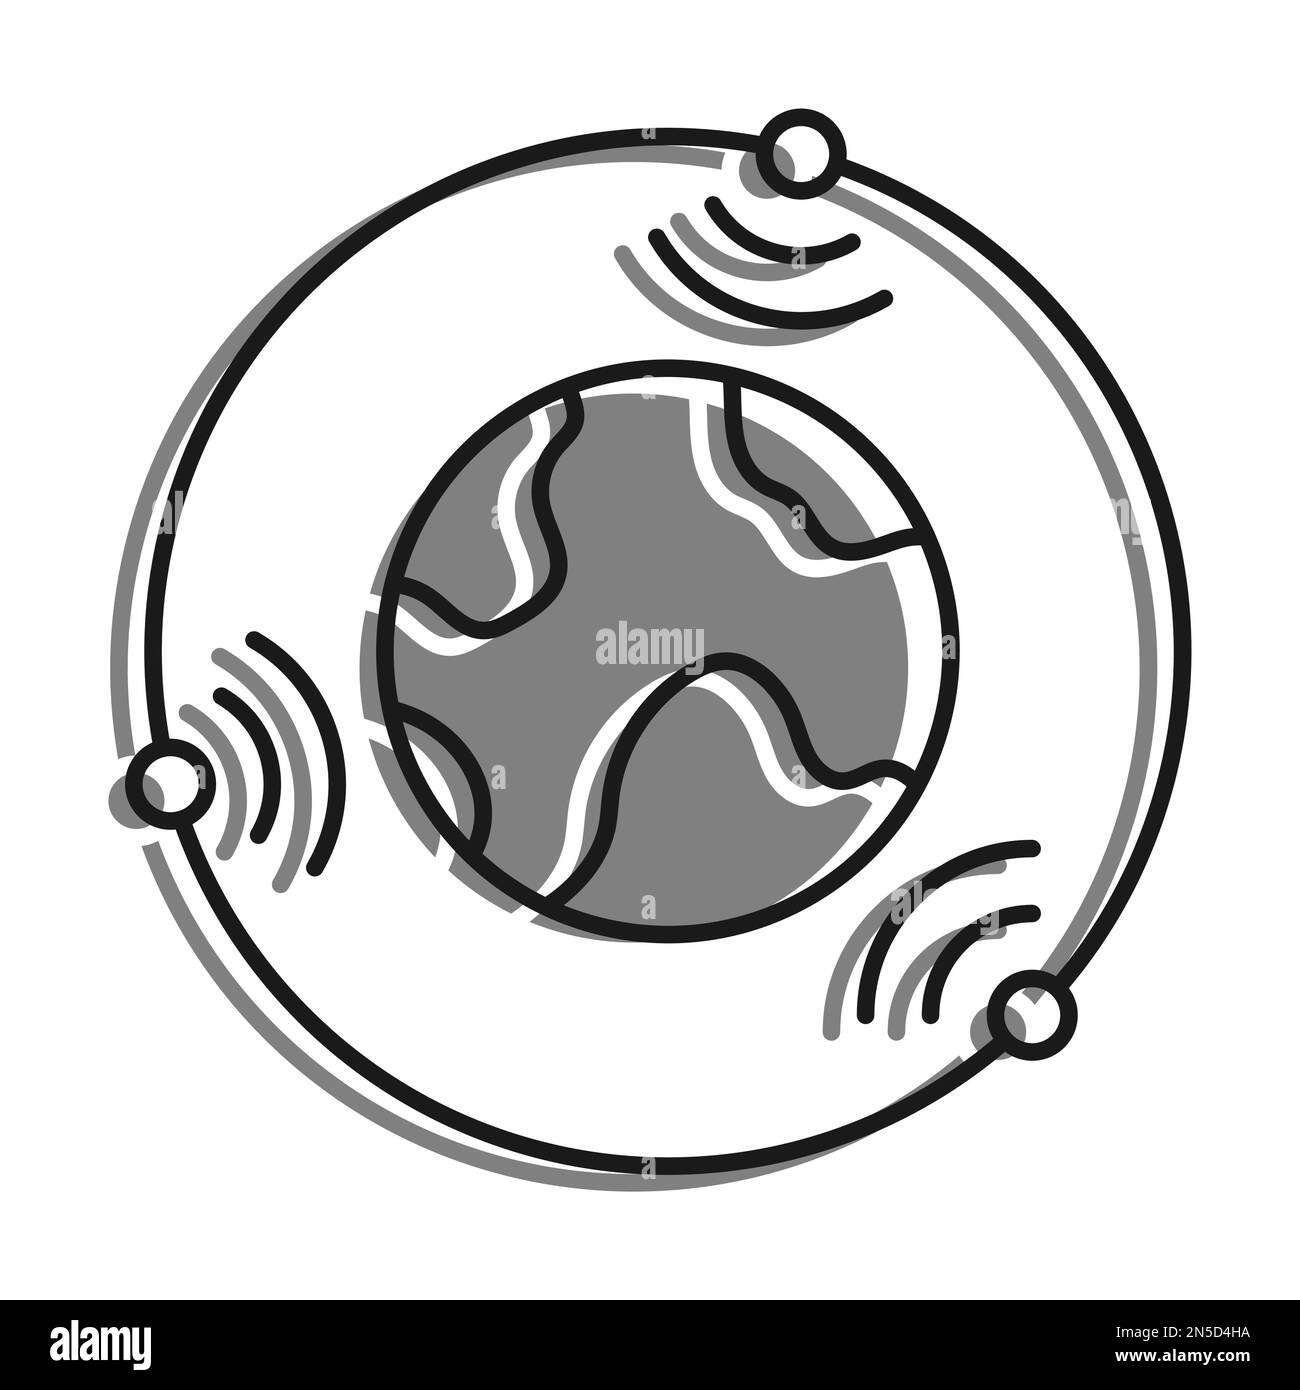 Linear filled with gray color icon. Satellites Fly In Orbit Around Planet Earth And Transmit Communication Signal. Satellite Communication And Gps Nav Stock Vector